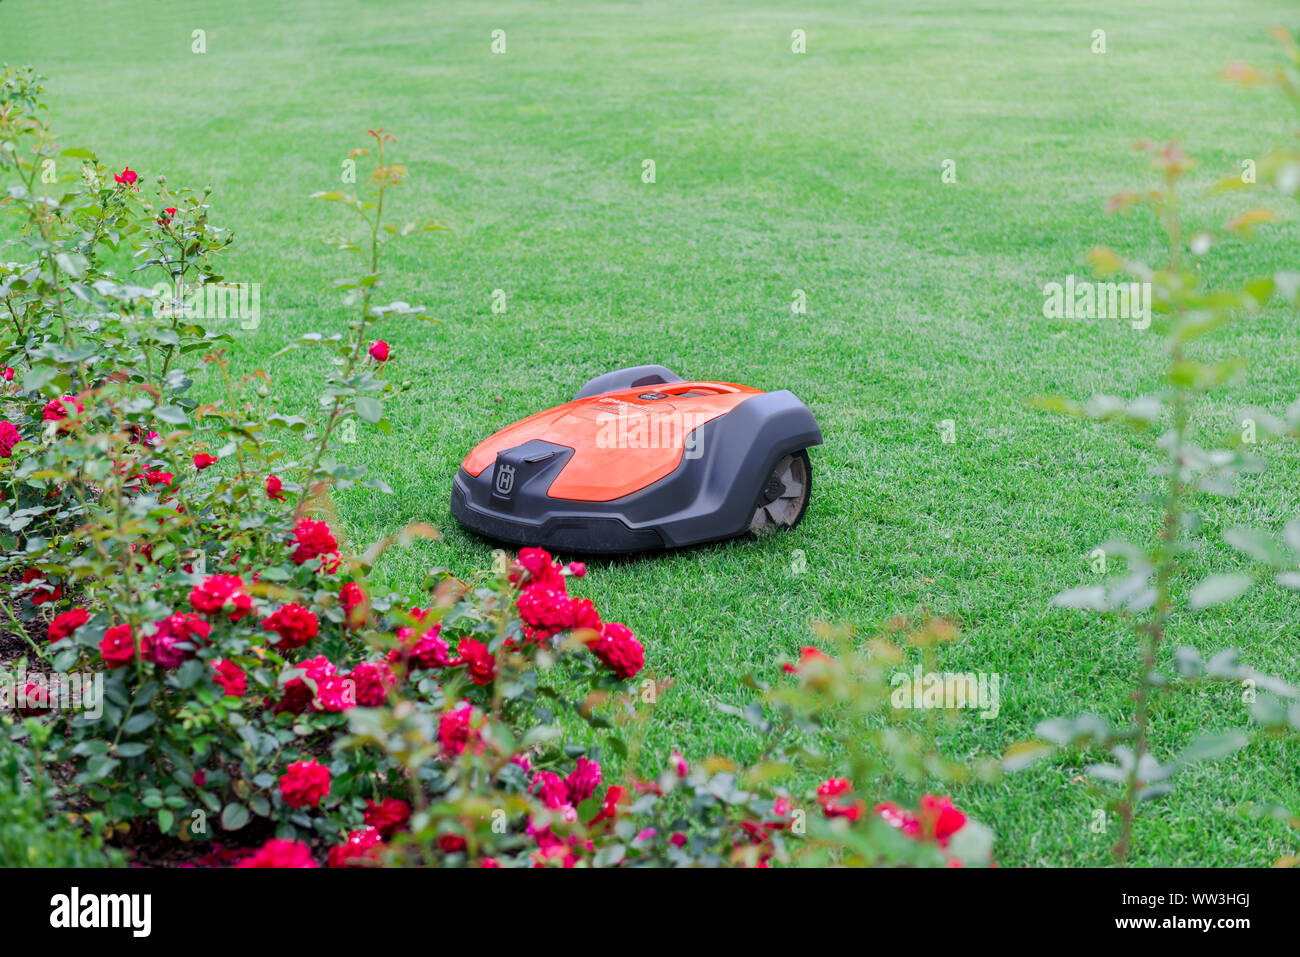 Walbrzych. Poland - september 8 2019: Automatic robotic lawnmower on green grass Stock Photo